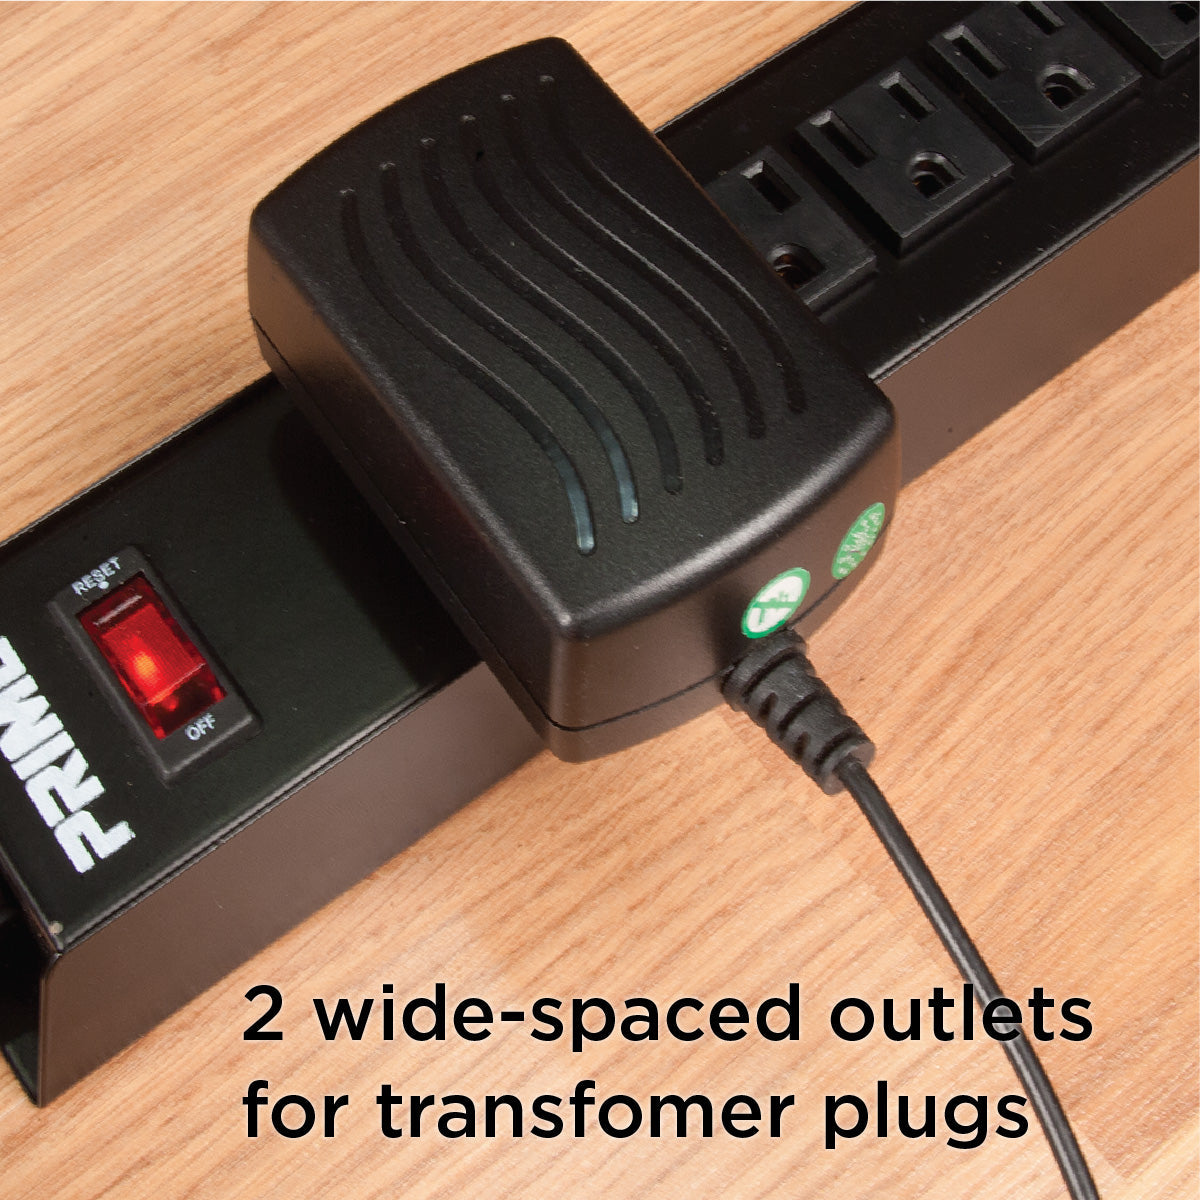 Prime 6-Outlet 1150 Joule Metal Power Bar Surge Protector w/15ft Cord